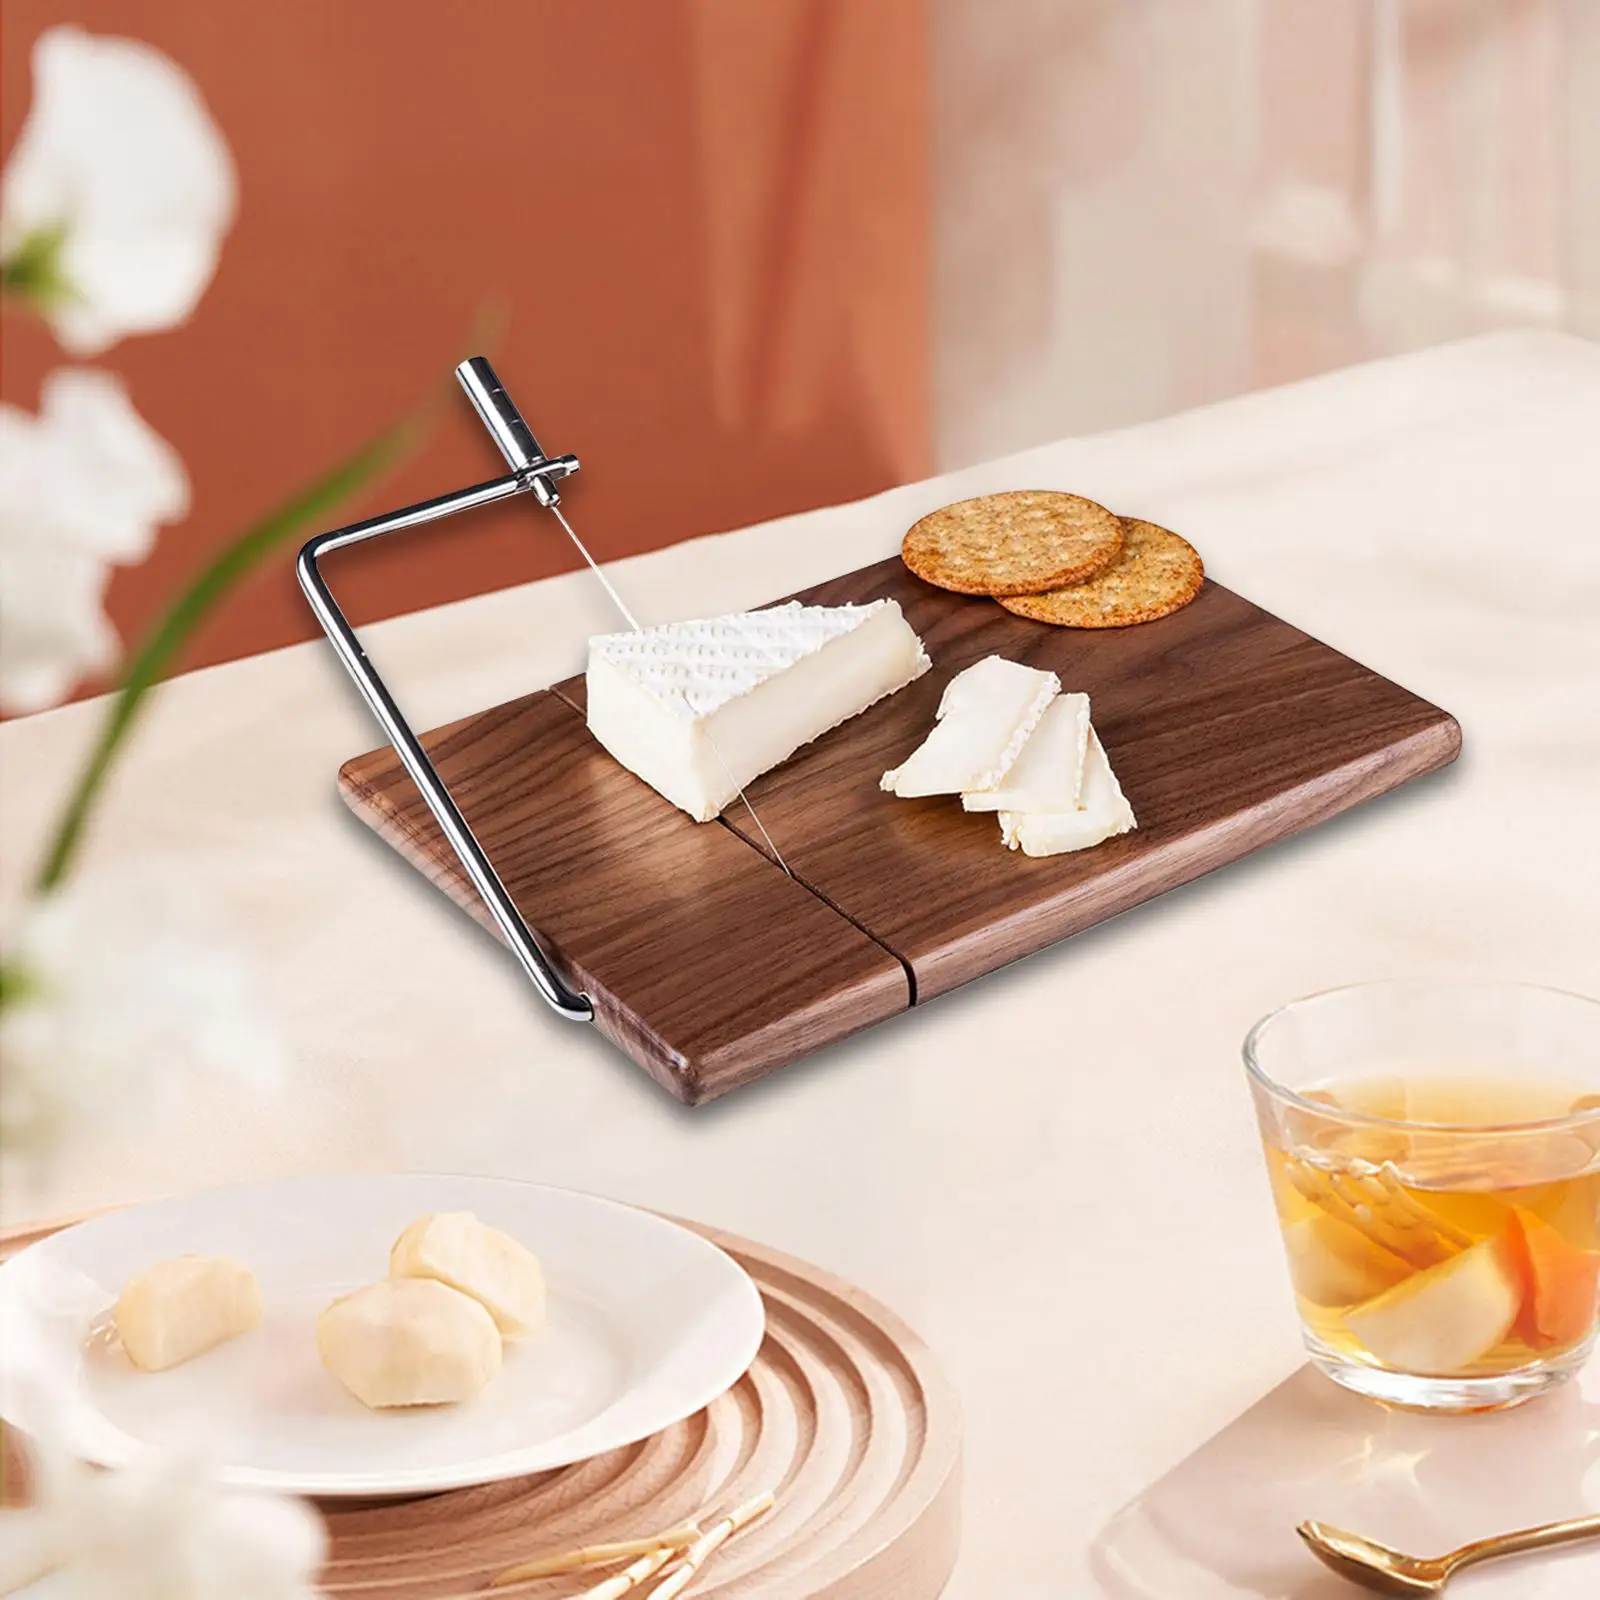 Wooden Cheese Slicer Board Handmade Craft Butter Dessert Food Slicer for Cheese Fruits Vegetables Handcrafted Soaps Butter